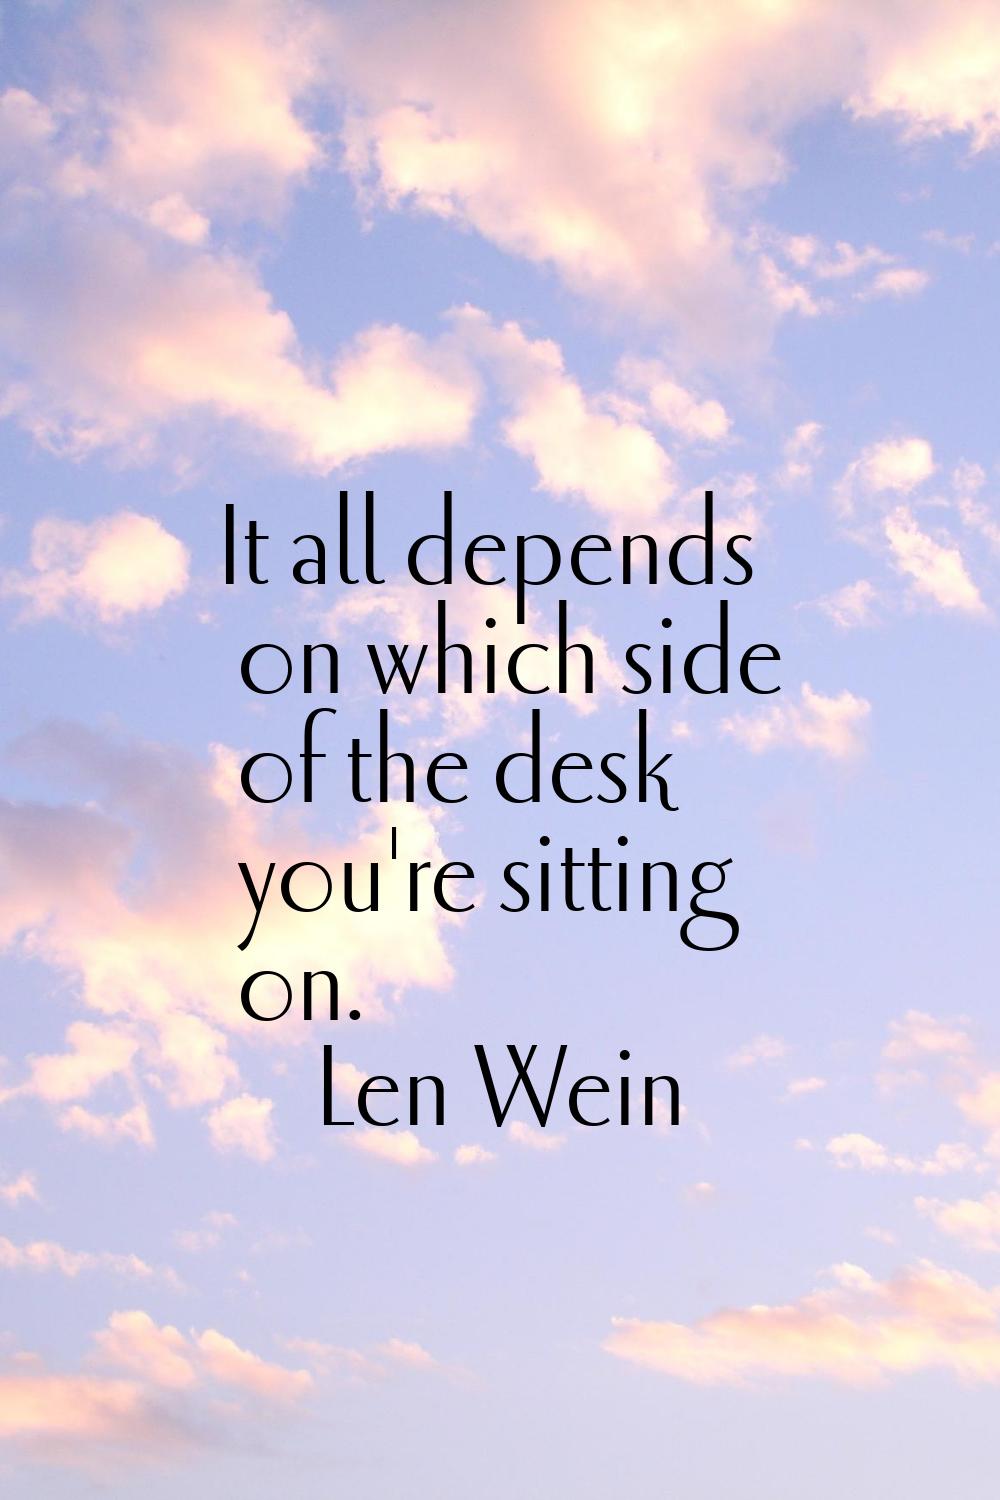 It all depends on which side of the desk you're sitting on.